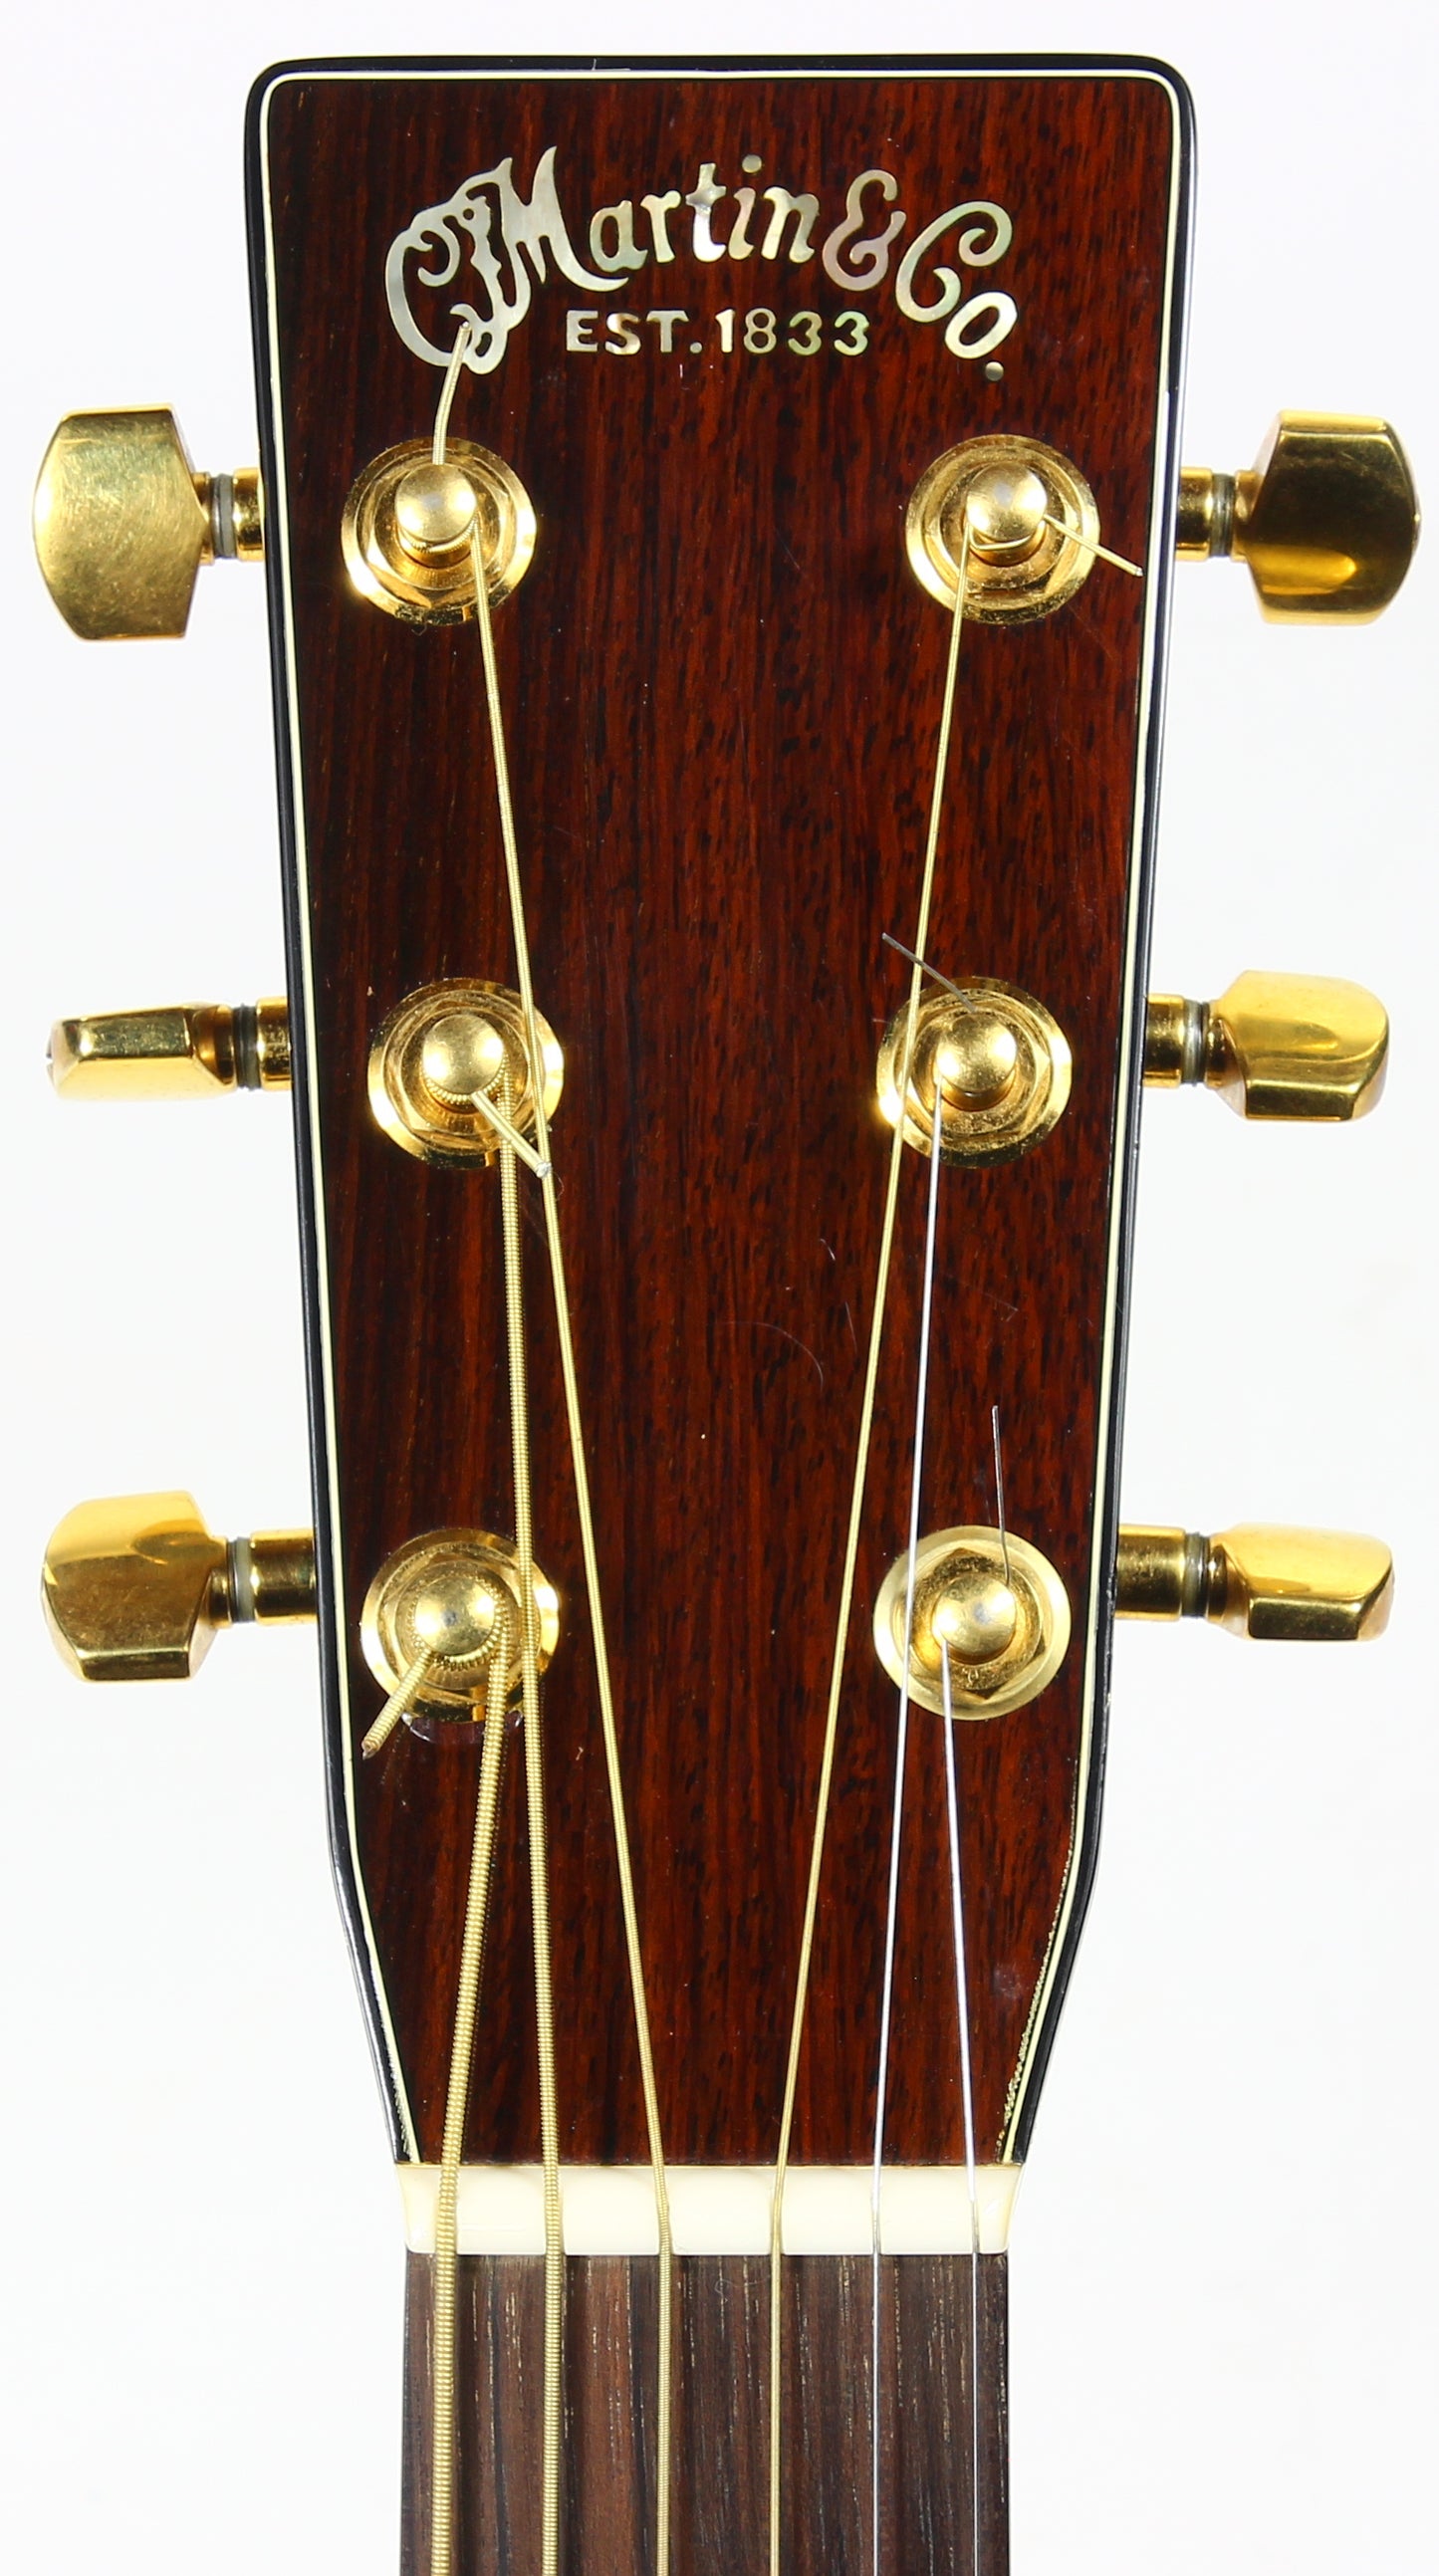 CLEAN! 1991 Martin Special OM-21 Acoustic Flat Top Guitar - like George Harrison! 1 of 36 Made!